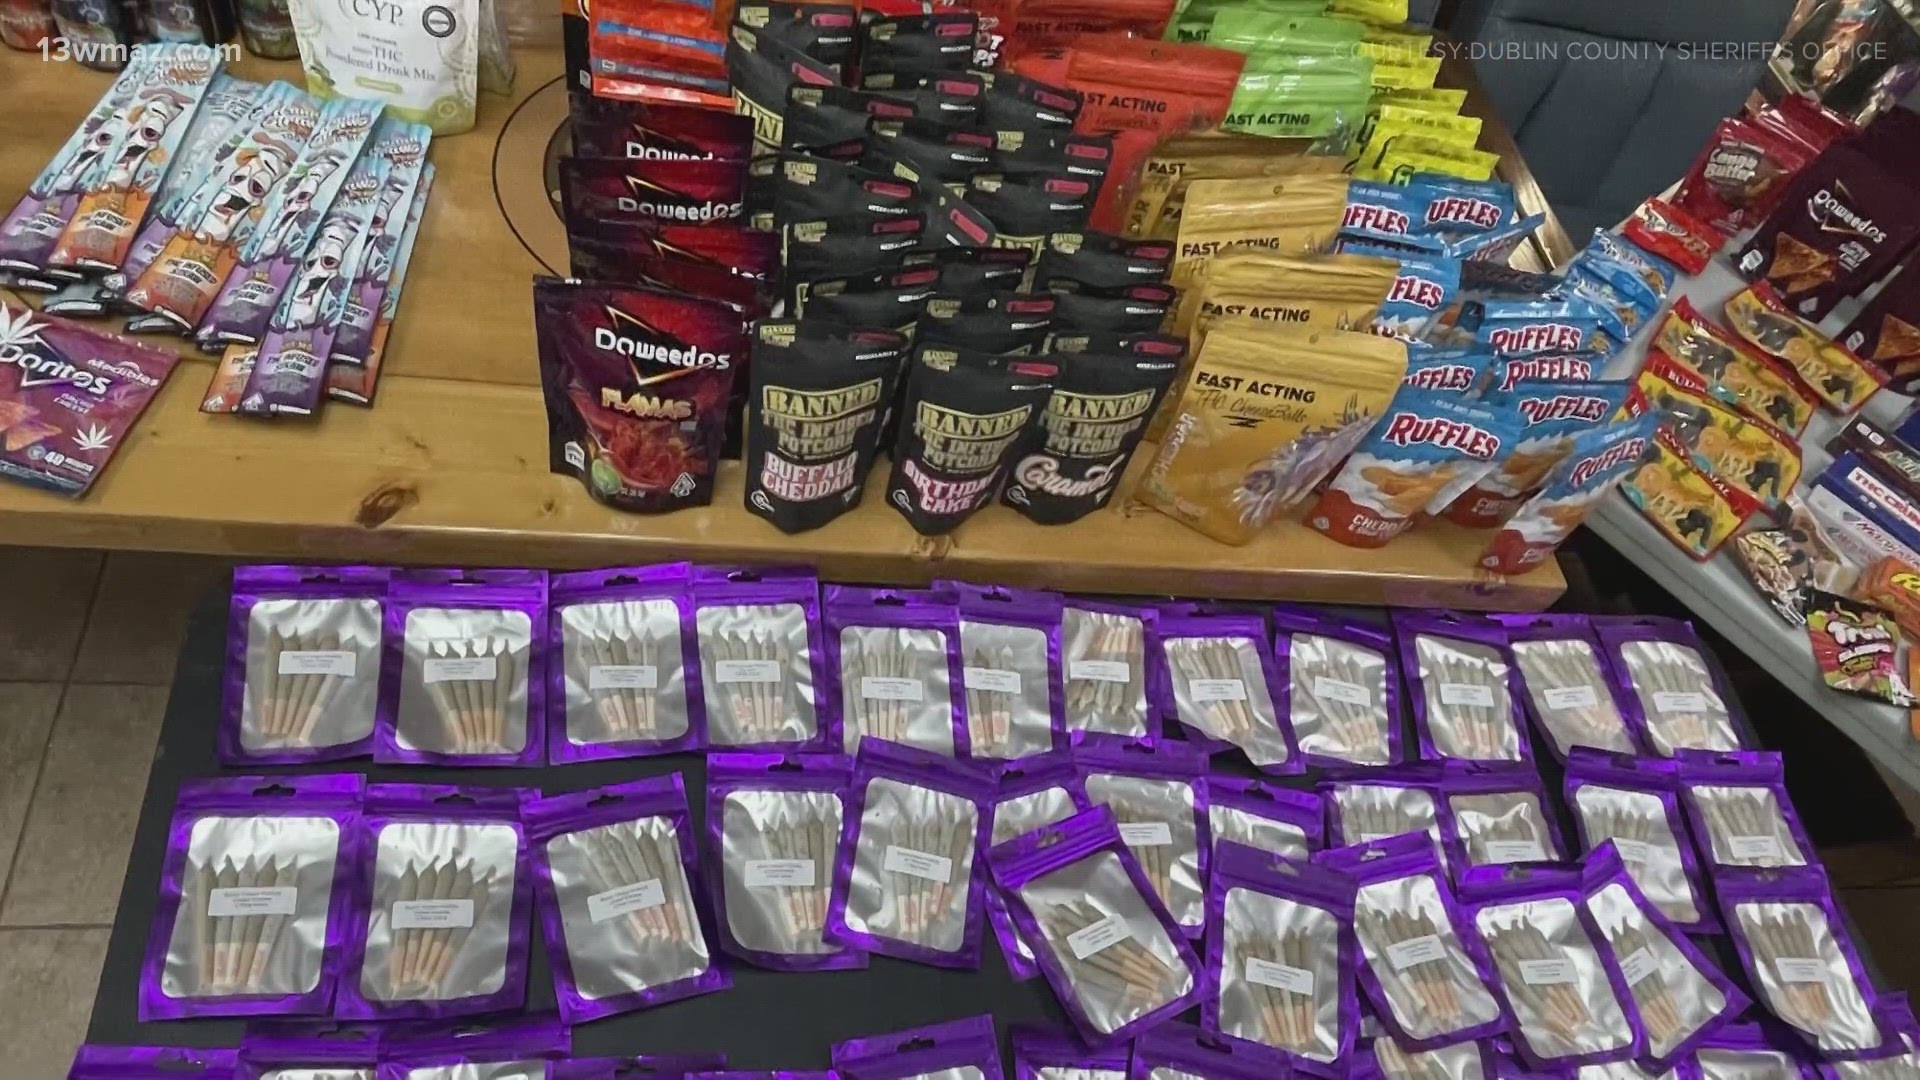 42-year-old Raphiel Wright is facing a string of drug charges after selling and possessing 30-40 pounds of marijuana, many looking similar to popular snacks.